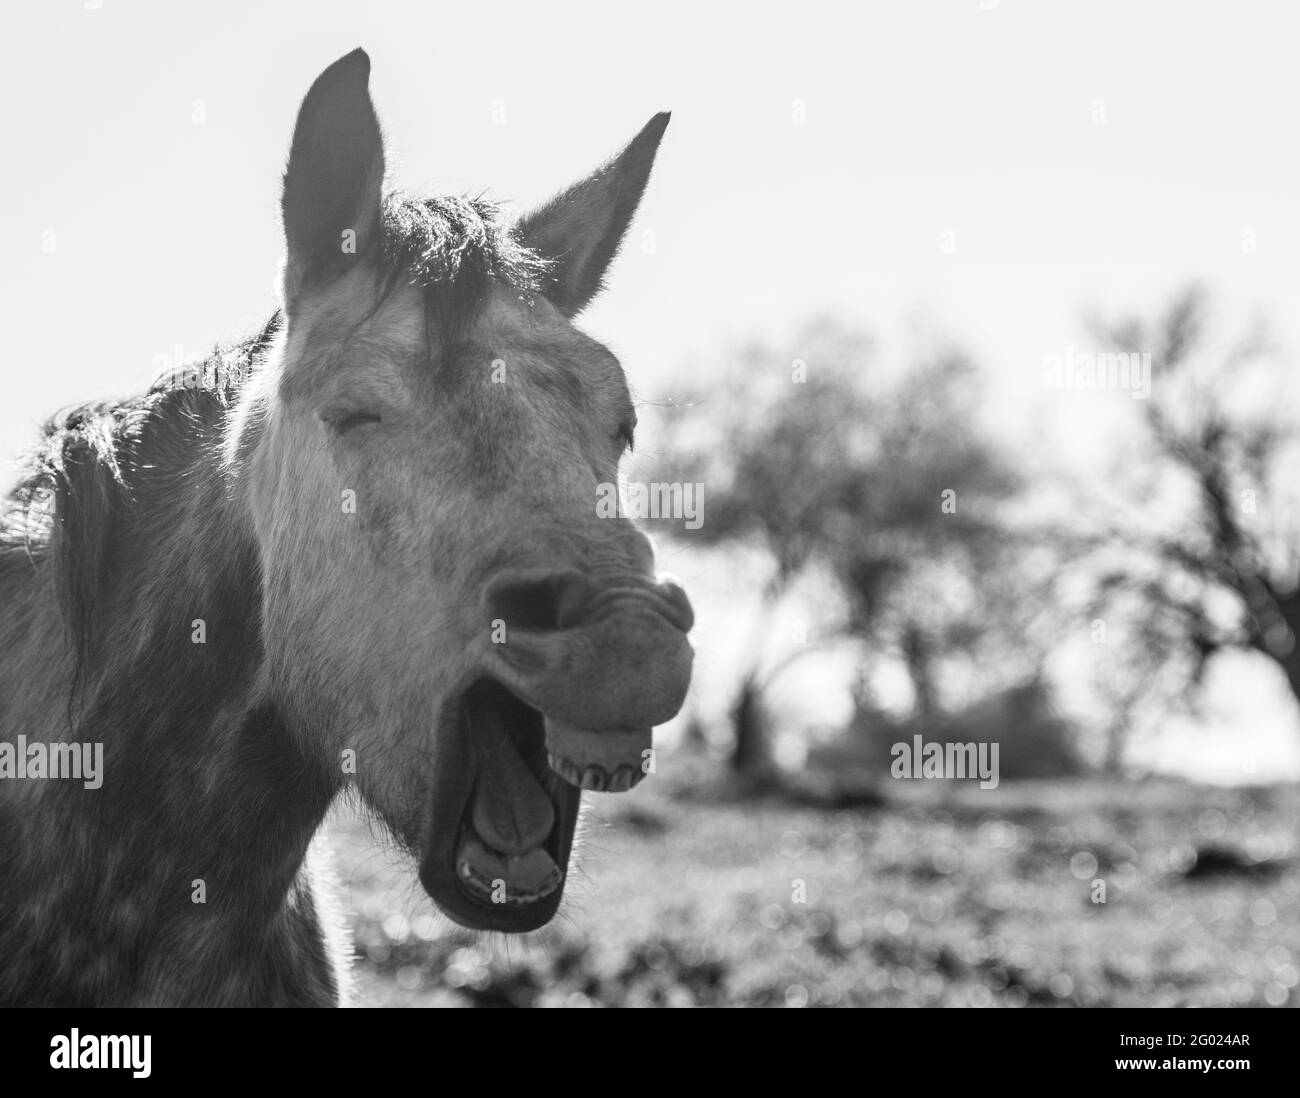 Black and white image of an horse open his mouth, looks like his laughing. Stock Photo